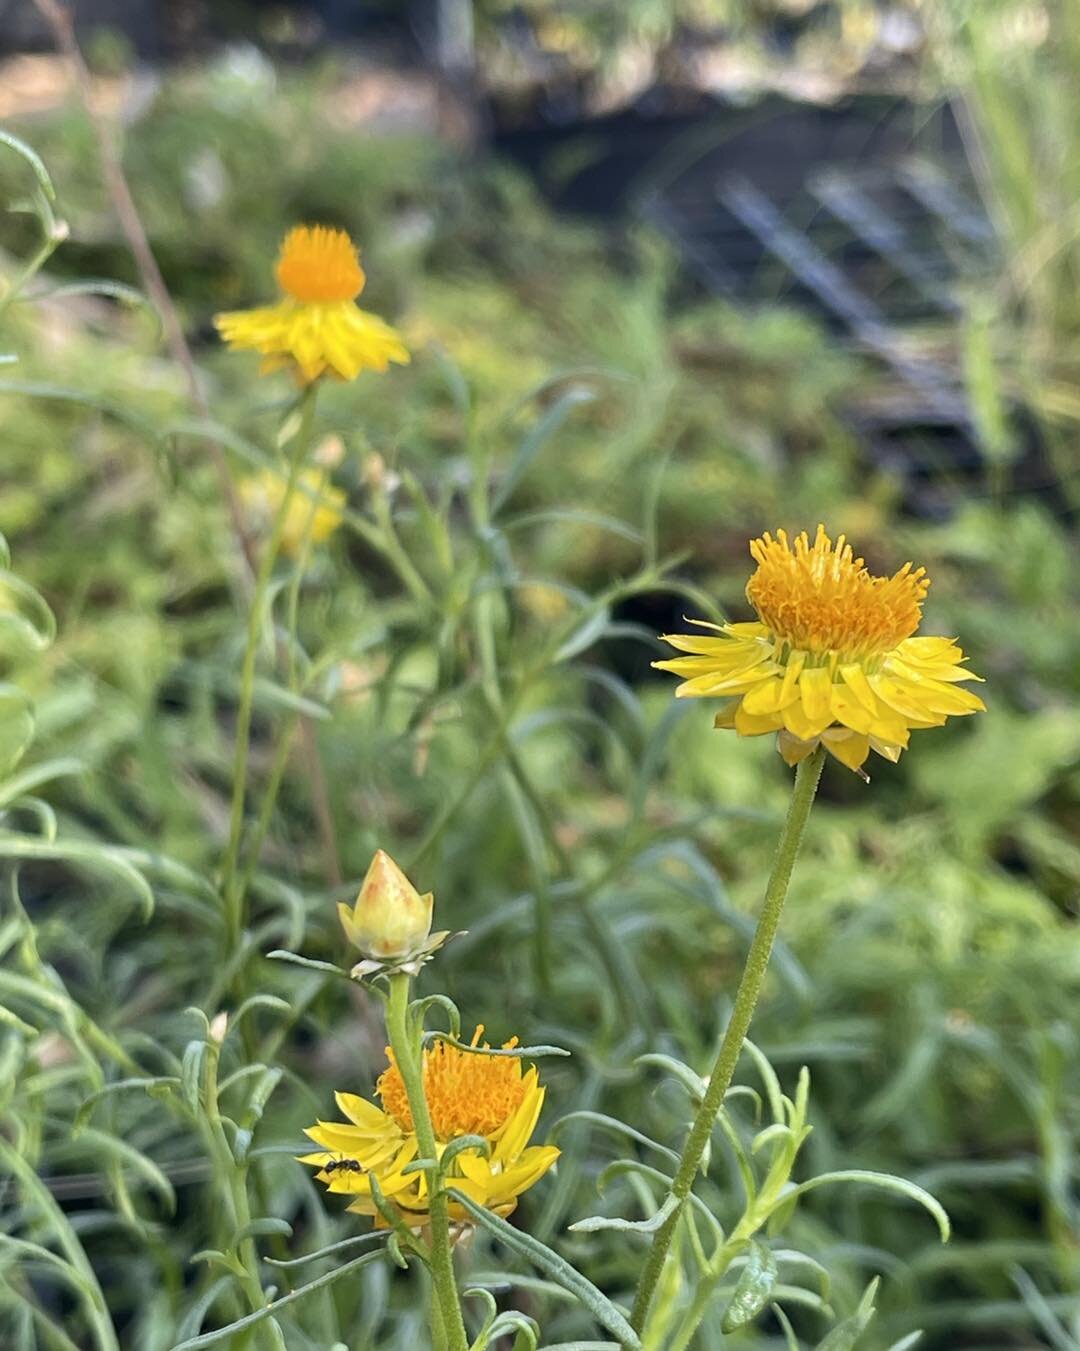 Yellow sticky everlastings. In stock and flowering right now&hellip;,. Yep the very ones in the pic could be yours 😳👏🏻👏🏻🌱🌱🌱🎉🎉🎉🥳🥳🥳. Retail Open Fri &amp; Saturday 

#alburywodongalocalnativeplants #nativeplantnursery #NortheastVictoria #